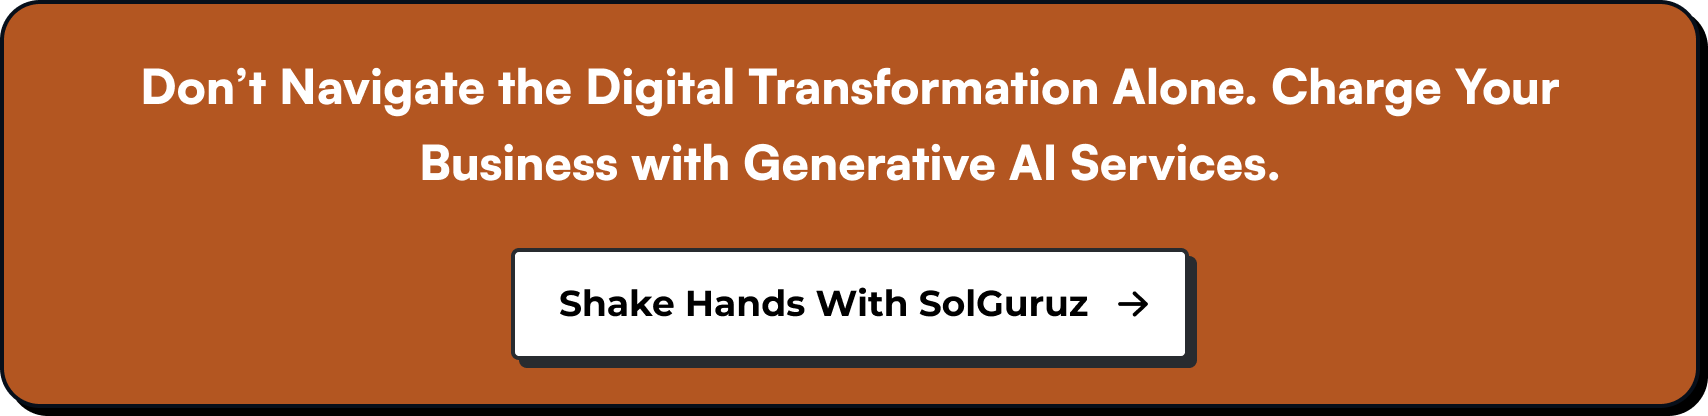 Don’t Navigate the Digital Transformation Alone. Charge Your Business with Generative AI Services.